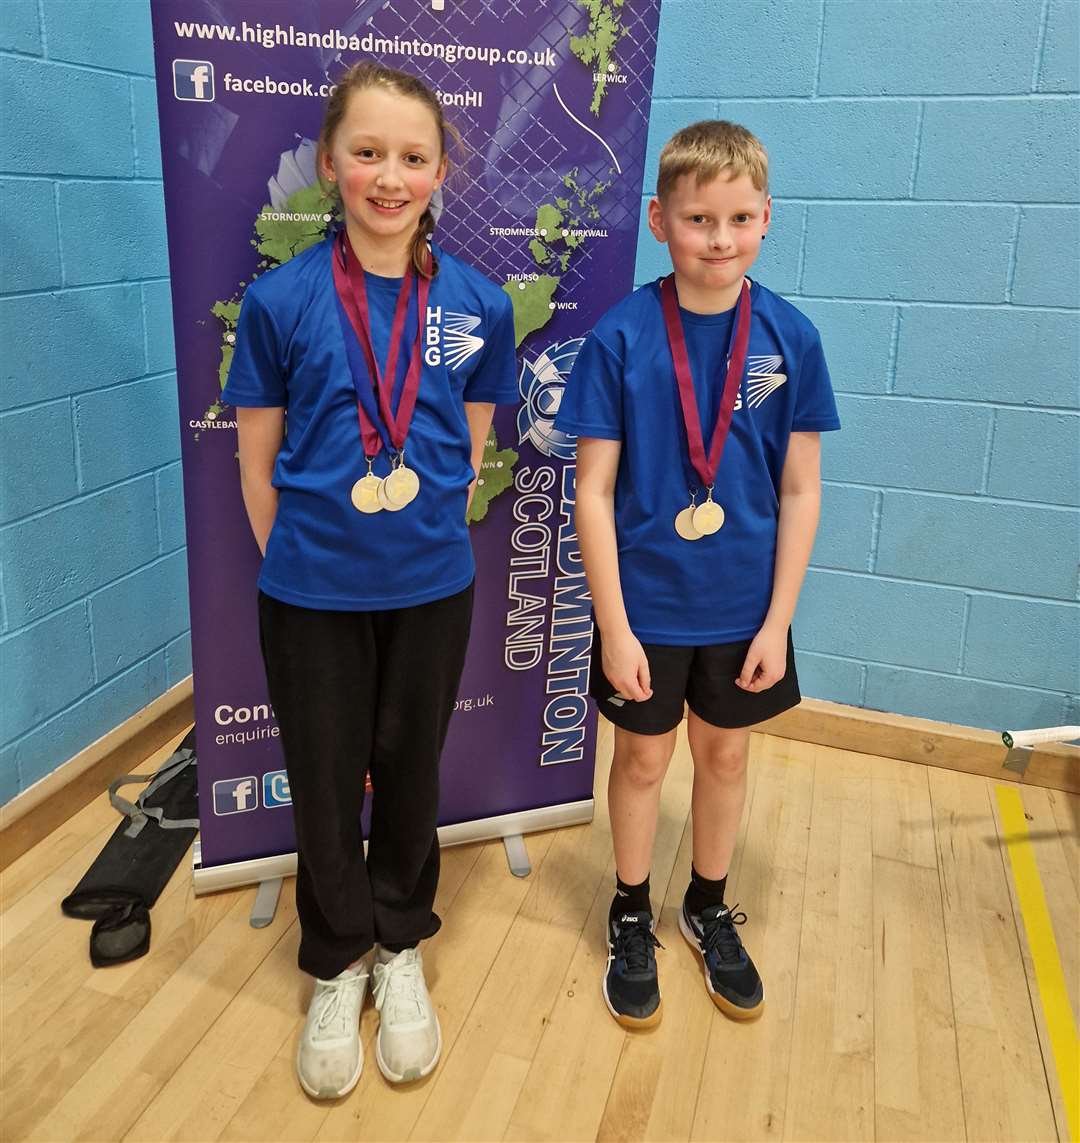 U13 mixed doubles winners Sophie Mackay and Liam Sinclair.